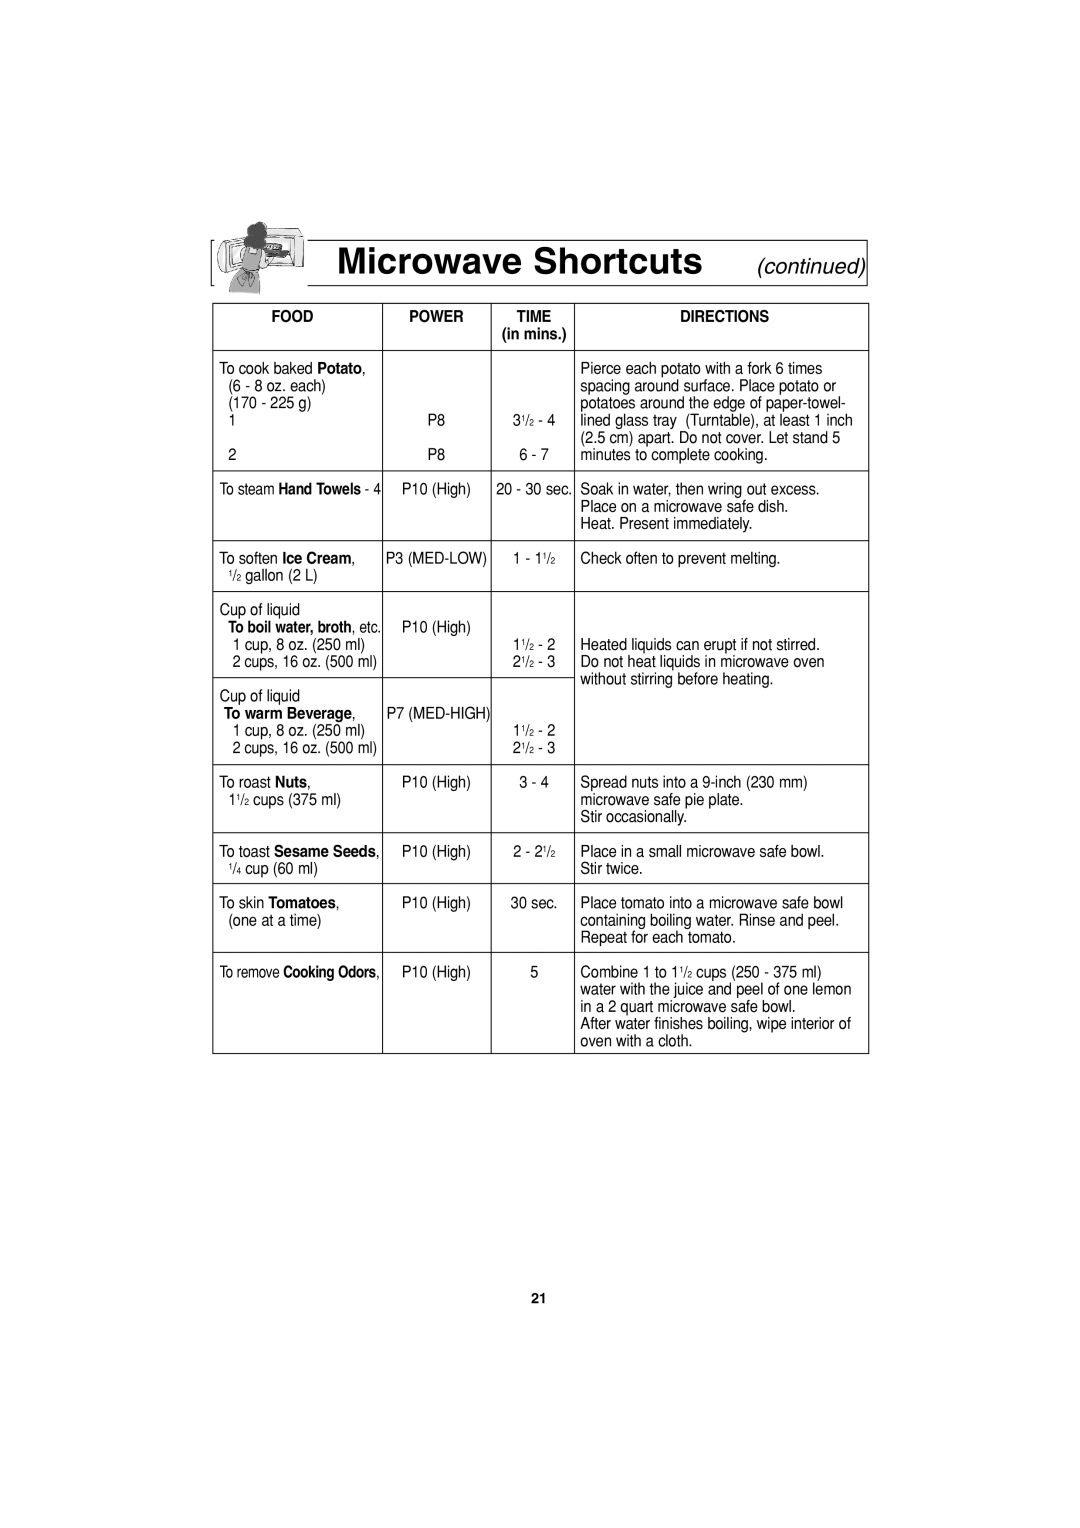 Panasonic NN-S533, NN-S743, NN-S943 Microwave Shortcuts, continued, Food, Directions, To warm Beverage 